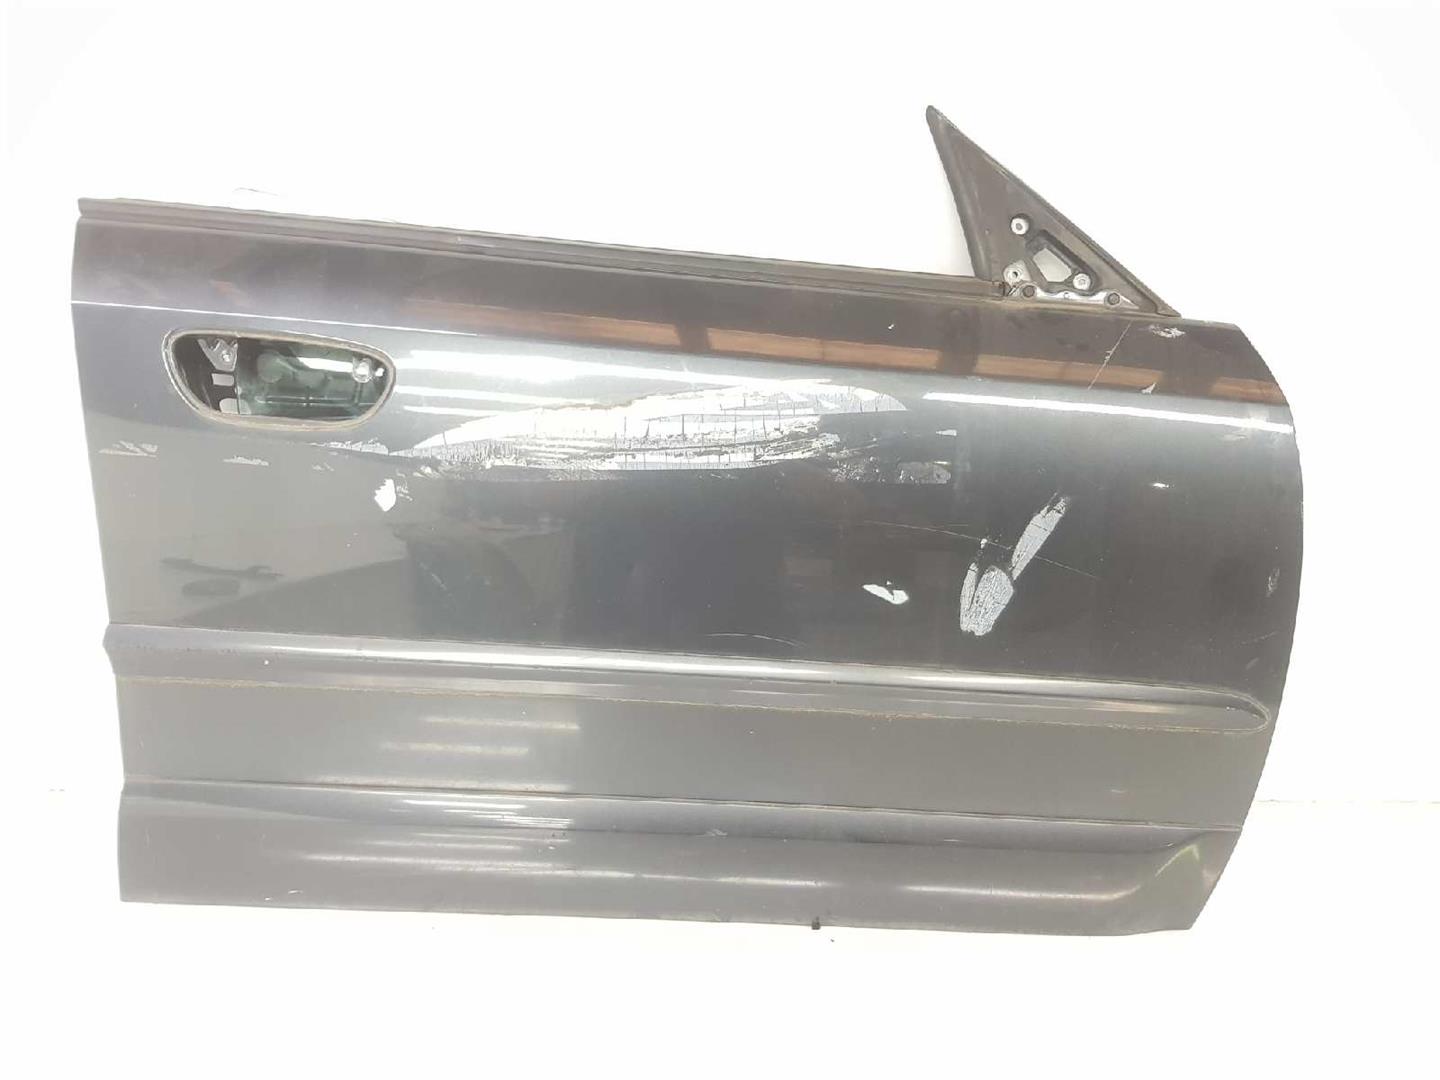 SUBARU Outback 3 generation (2003-2009) Front Right Door 60009AG0629P, 60009AG0629P 24117901